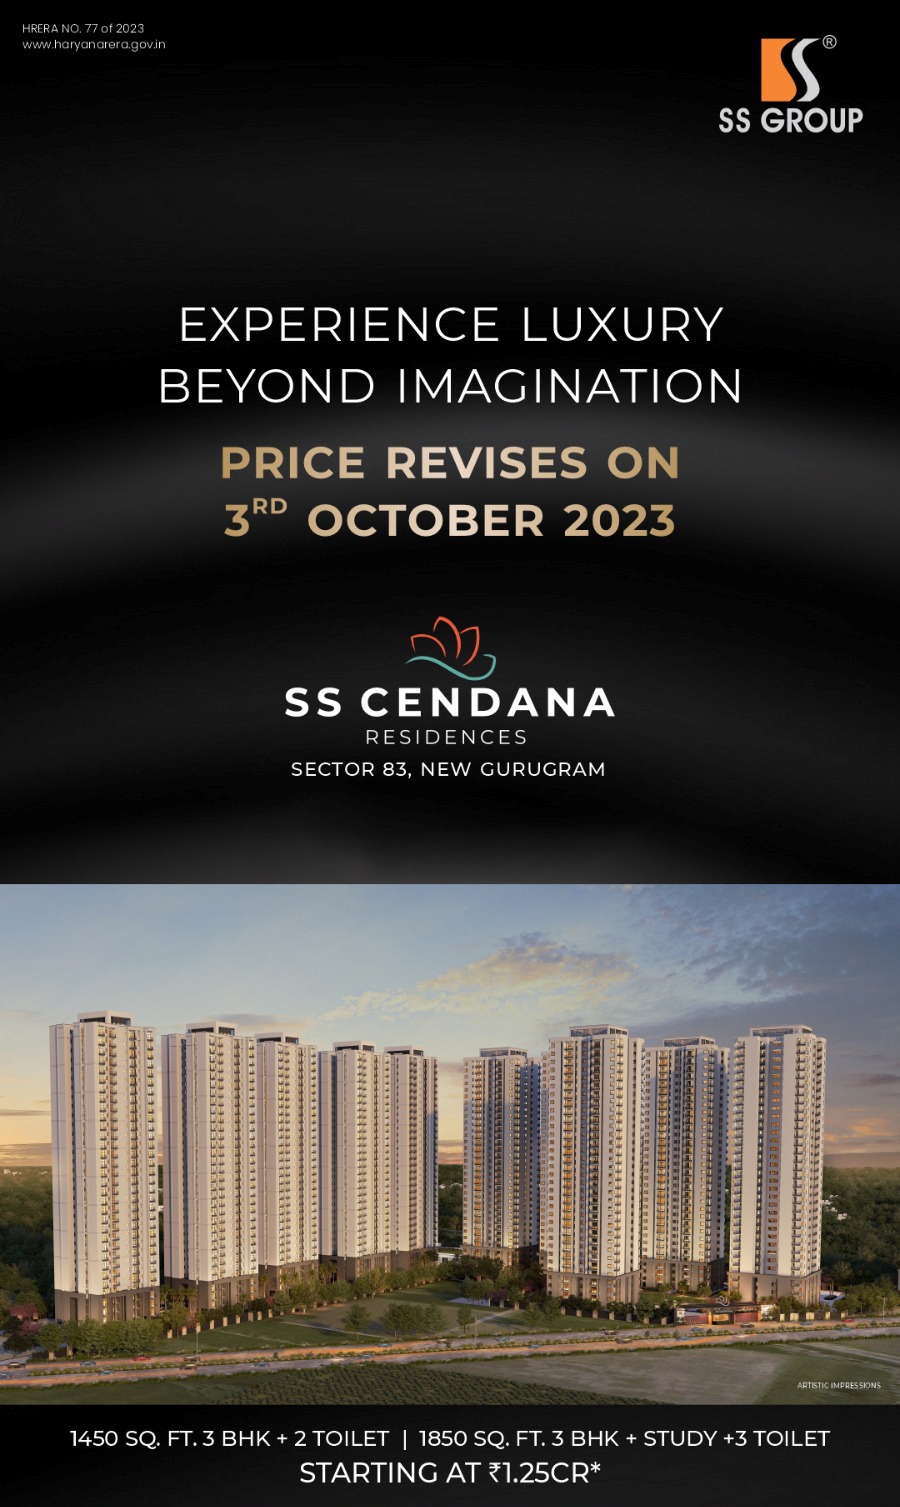 Price revises on 3rd October 2023 at SS Cendana Residence in Sector 83, Gurgaon